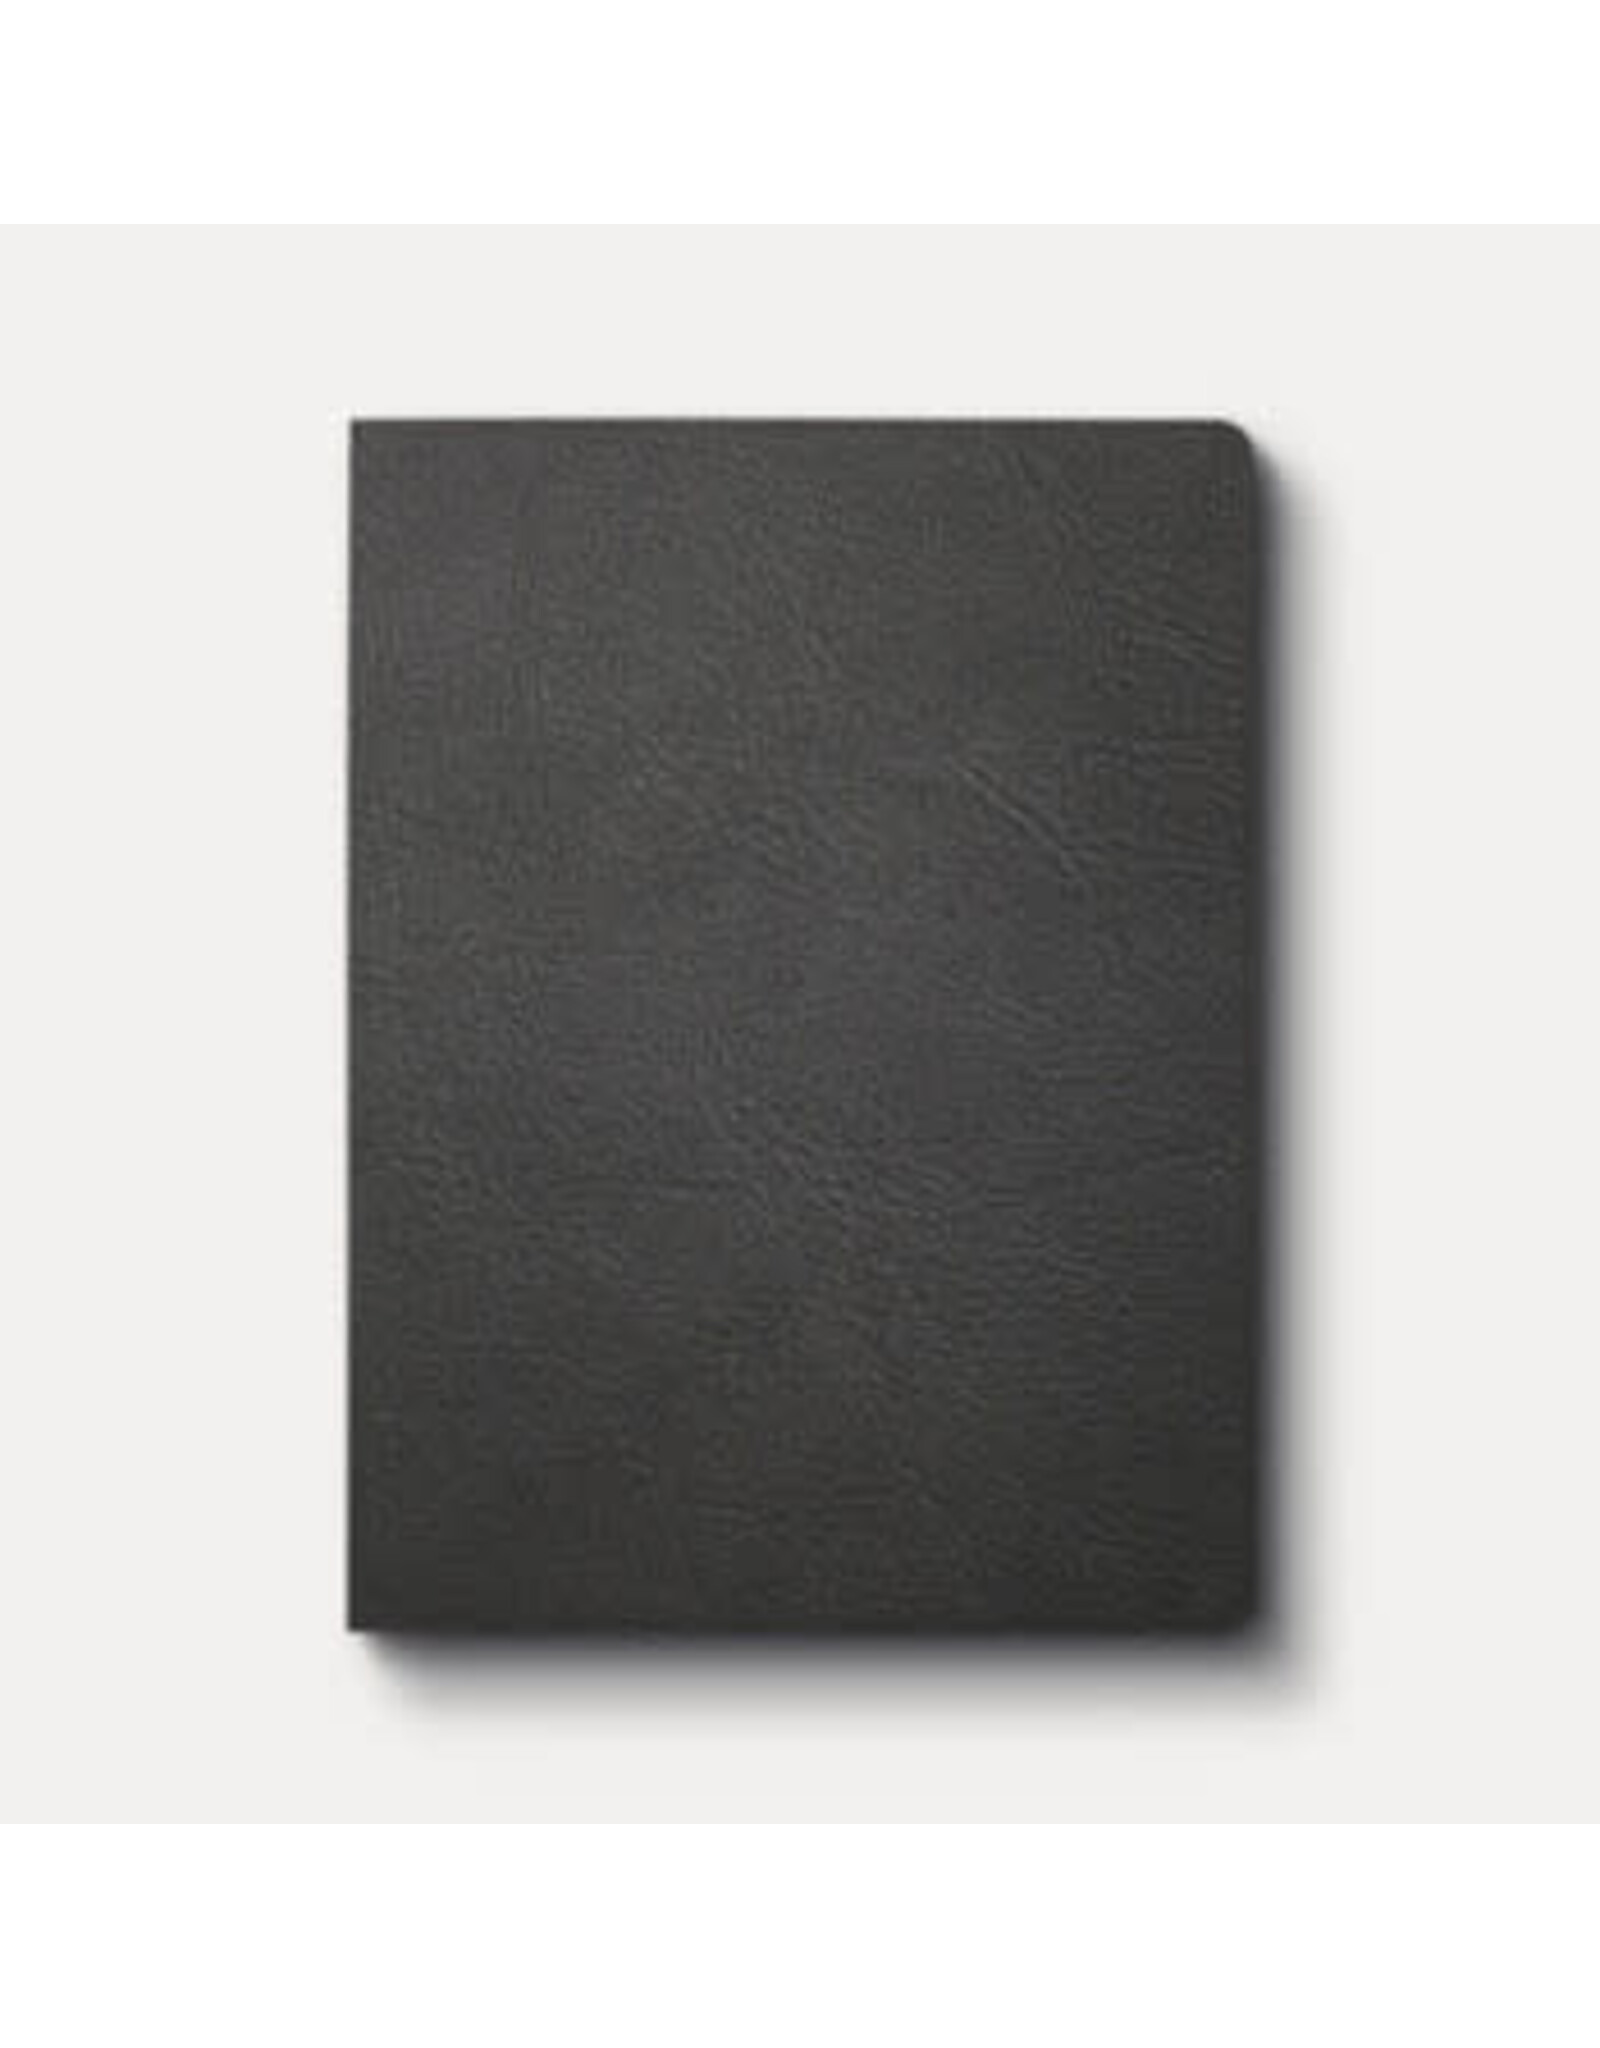 CSB Life Counsel Bible: Practical Wisdom for All of Life (Black Genuine Leather)